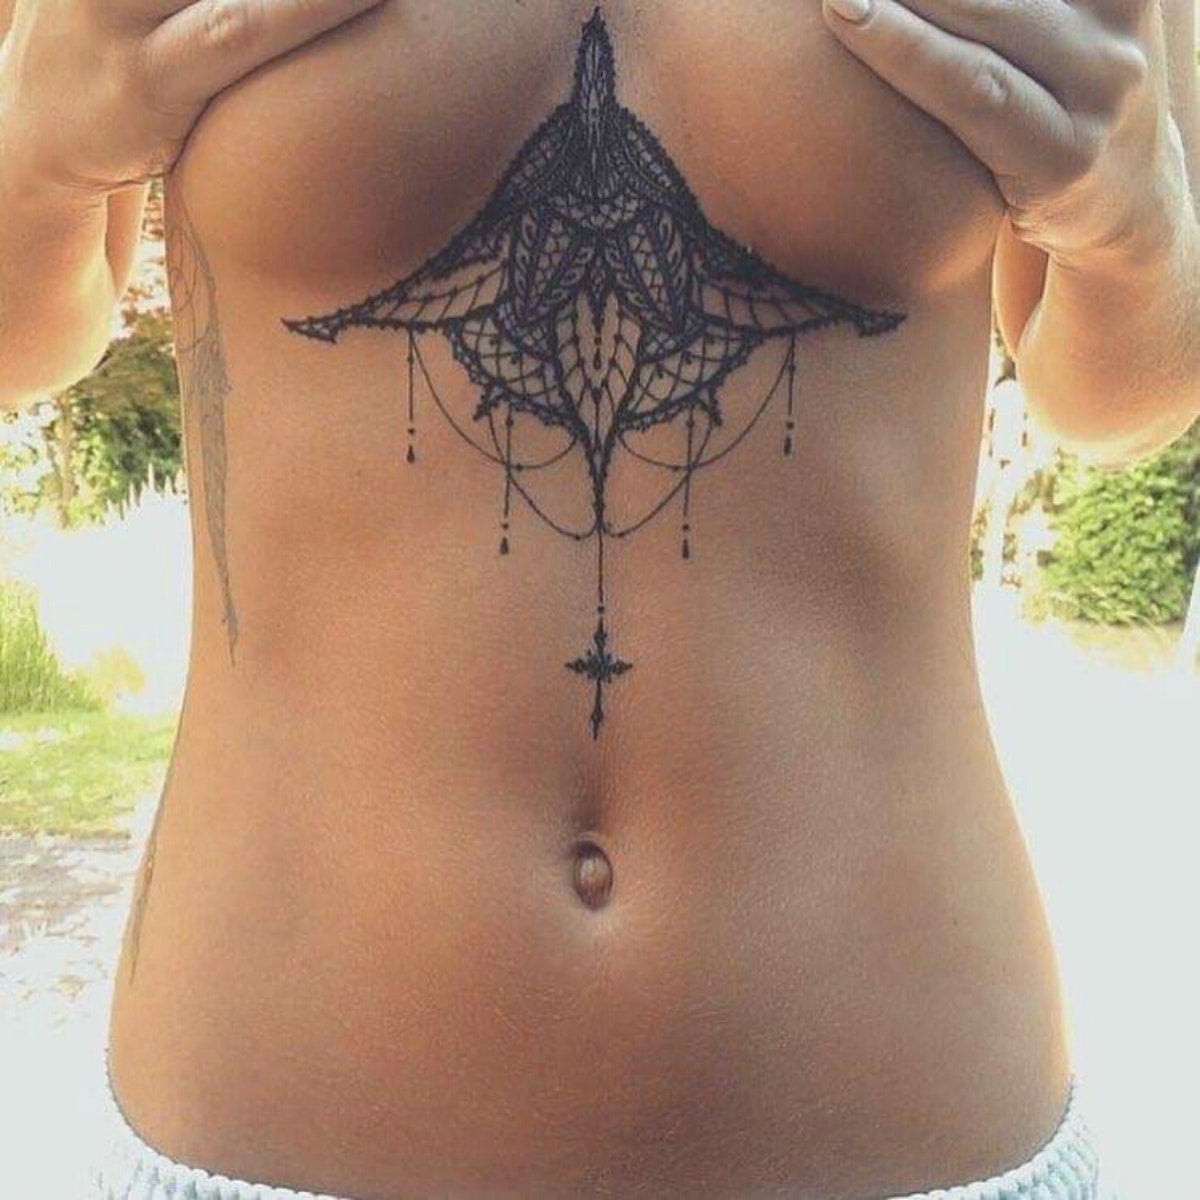 Top 6 Best Places for Female Erotic Tattoos